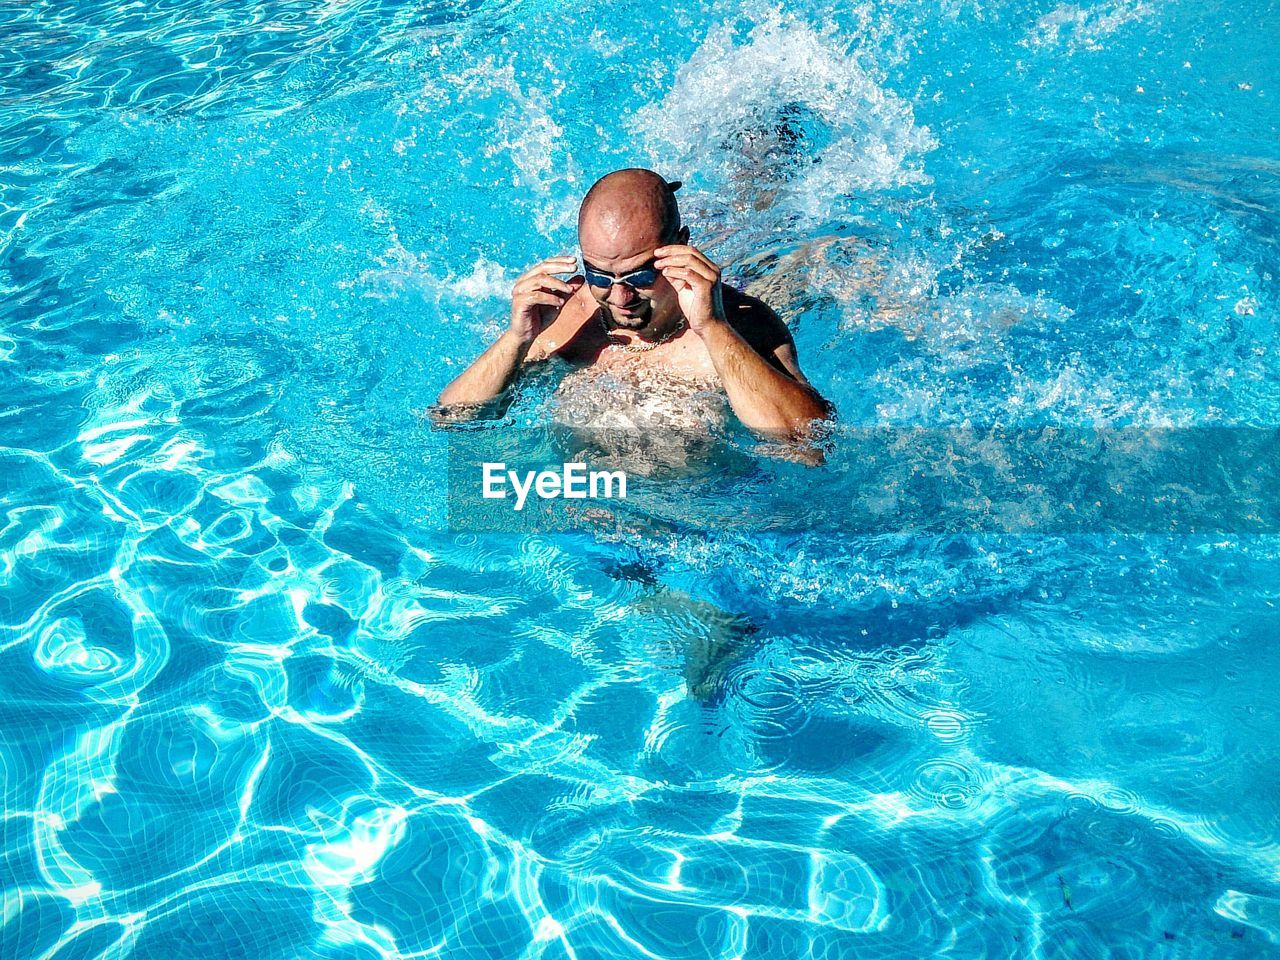 High angle view of man wearing goggles in swimming pool